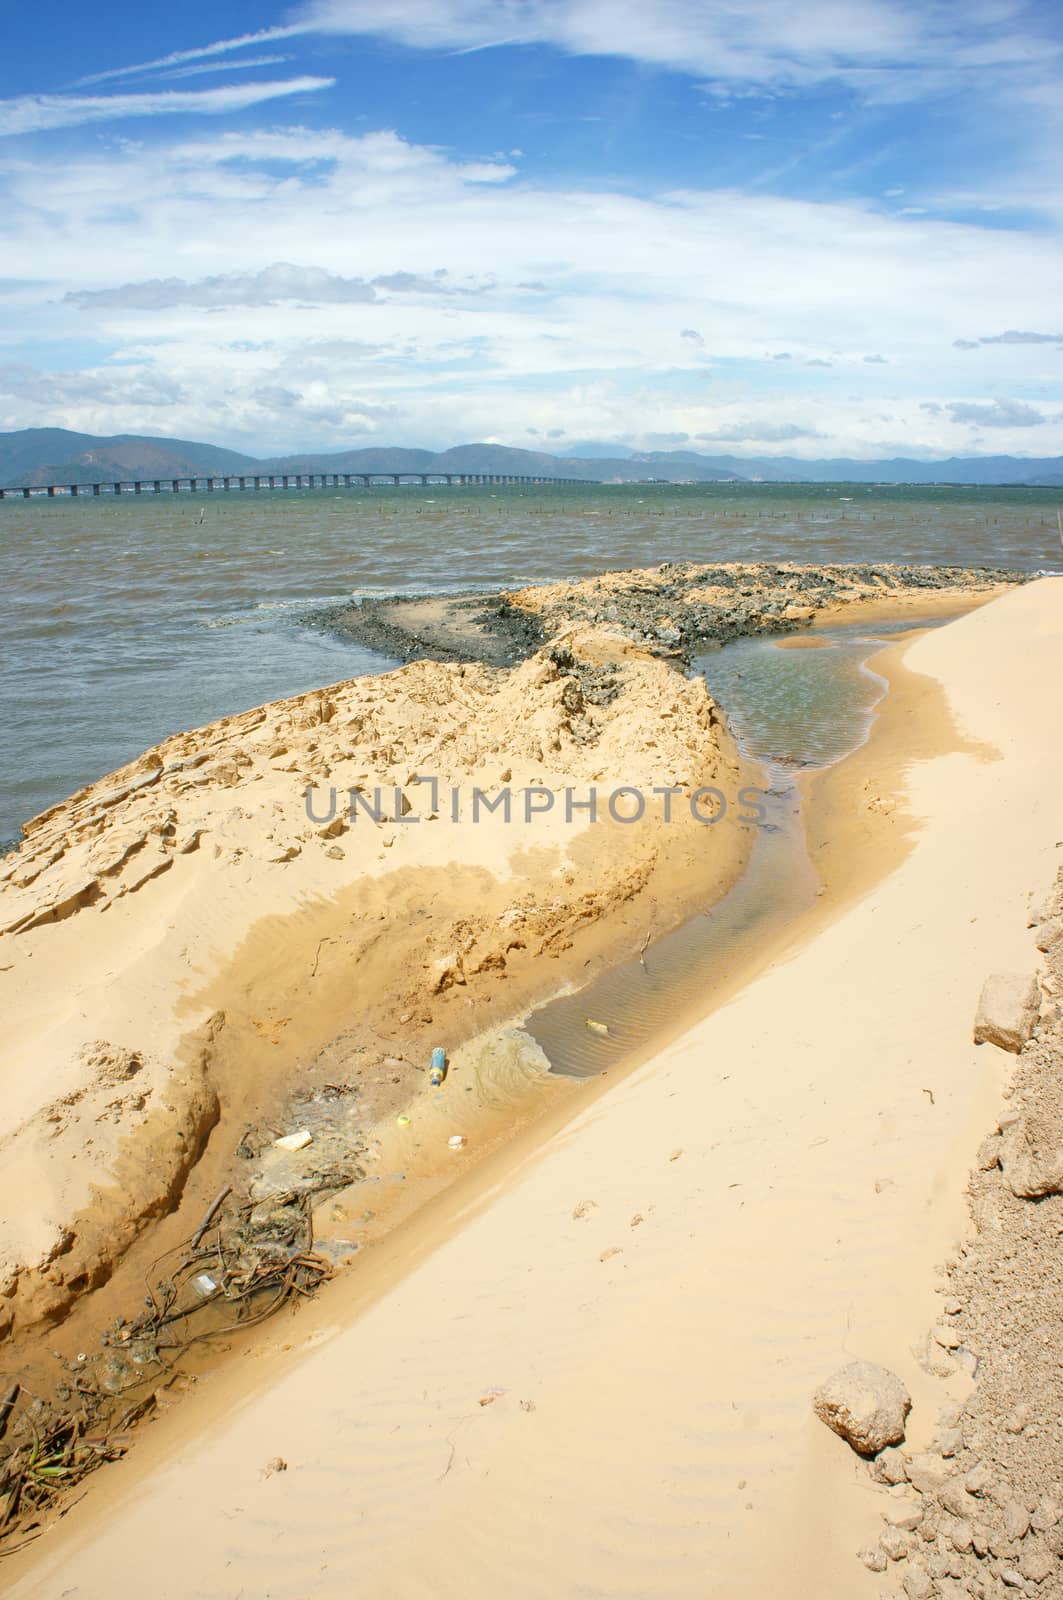 Reclamation project at Quy Nhon, Binh Dinh, Viet Nam, fill up sand on water to make construction plan, try to change nature for human profit, fill soil at seaside